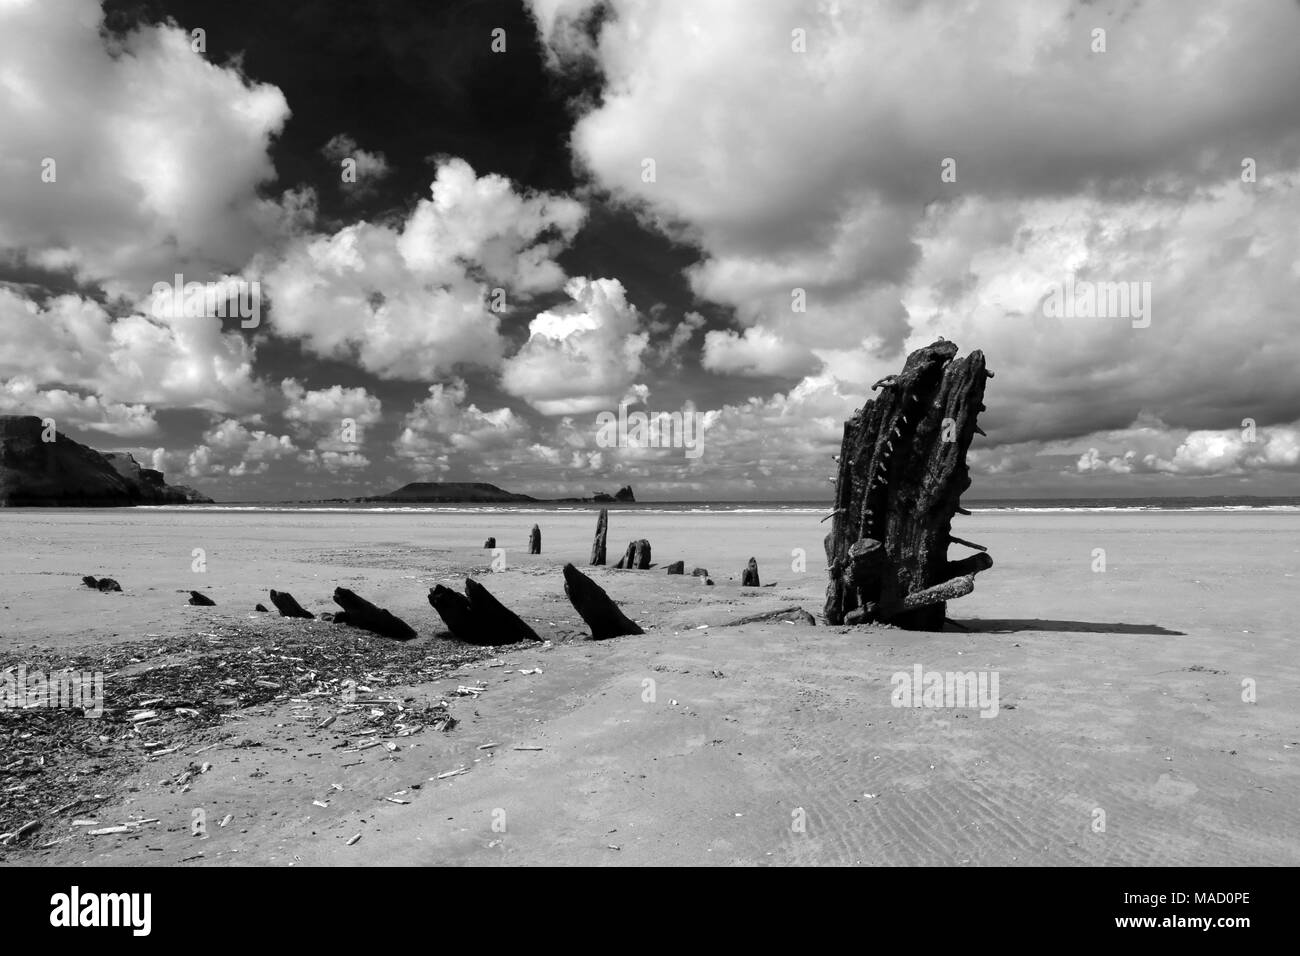 Monochrome image of the wreck of the Helvetia on Rhossili Beach, Gower Peninsula, Wales, UK. Stock Photo